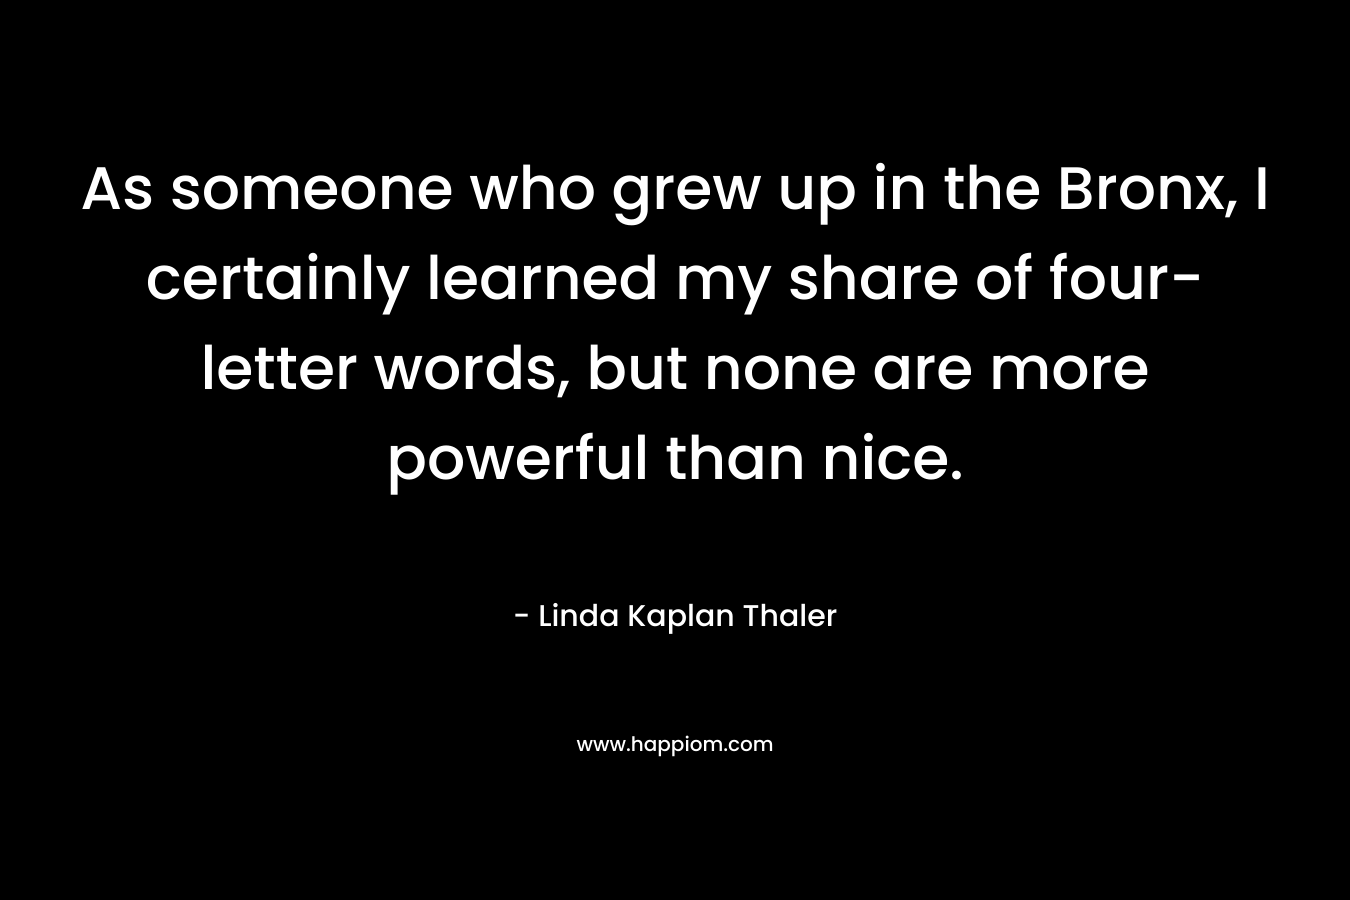 As someone who grew up in the Bronx, I certainly learned my share of four-letter words, but none are more powerful than nice. – Linda Kaplan Thaler